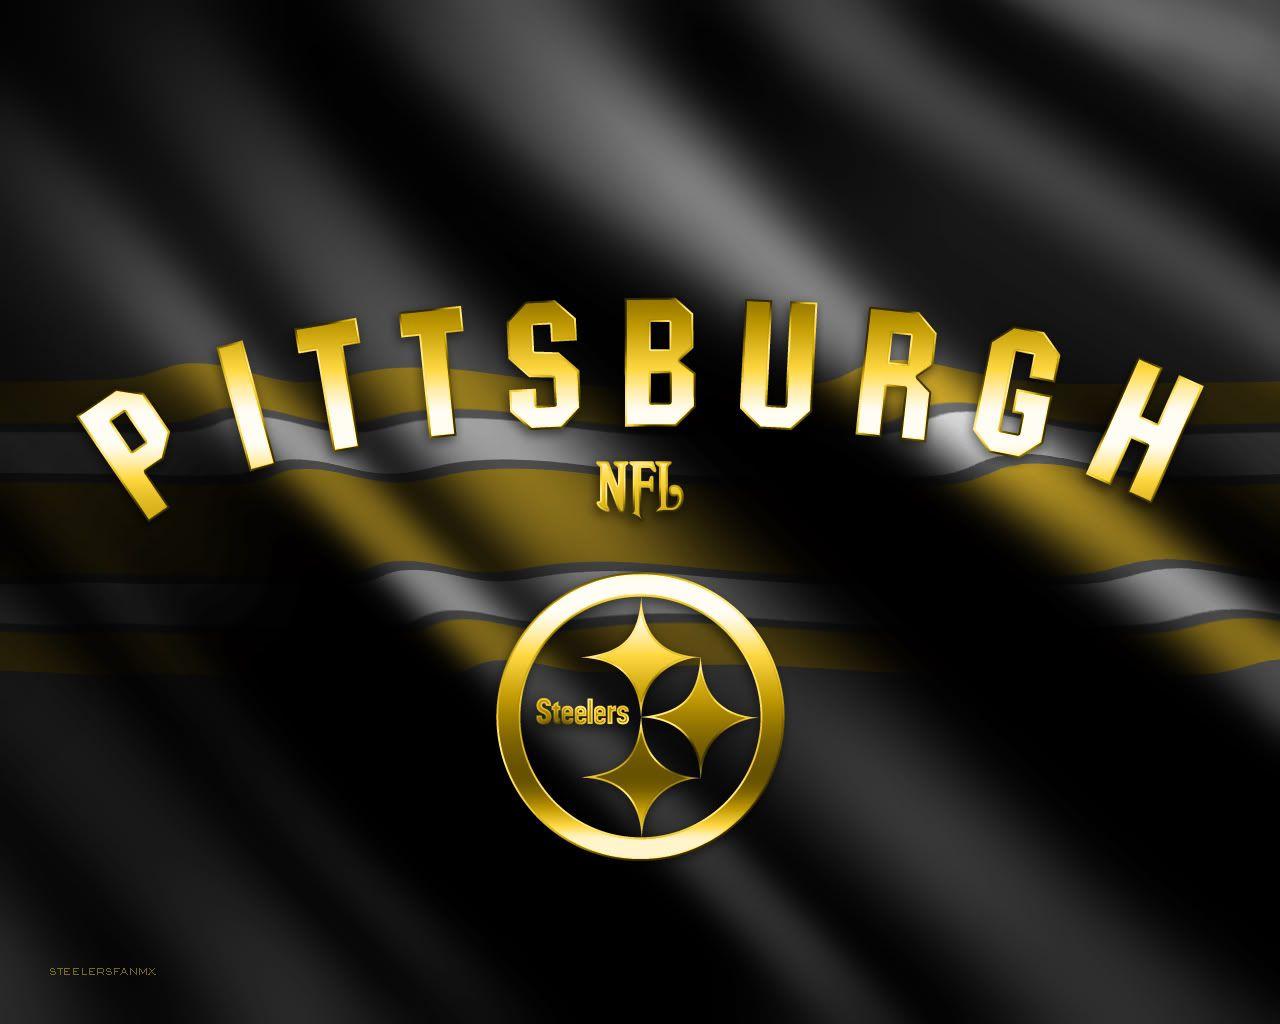 pittsburgh steelers background 7. Background Check All